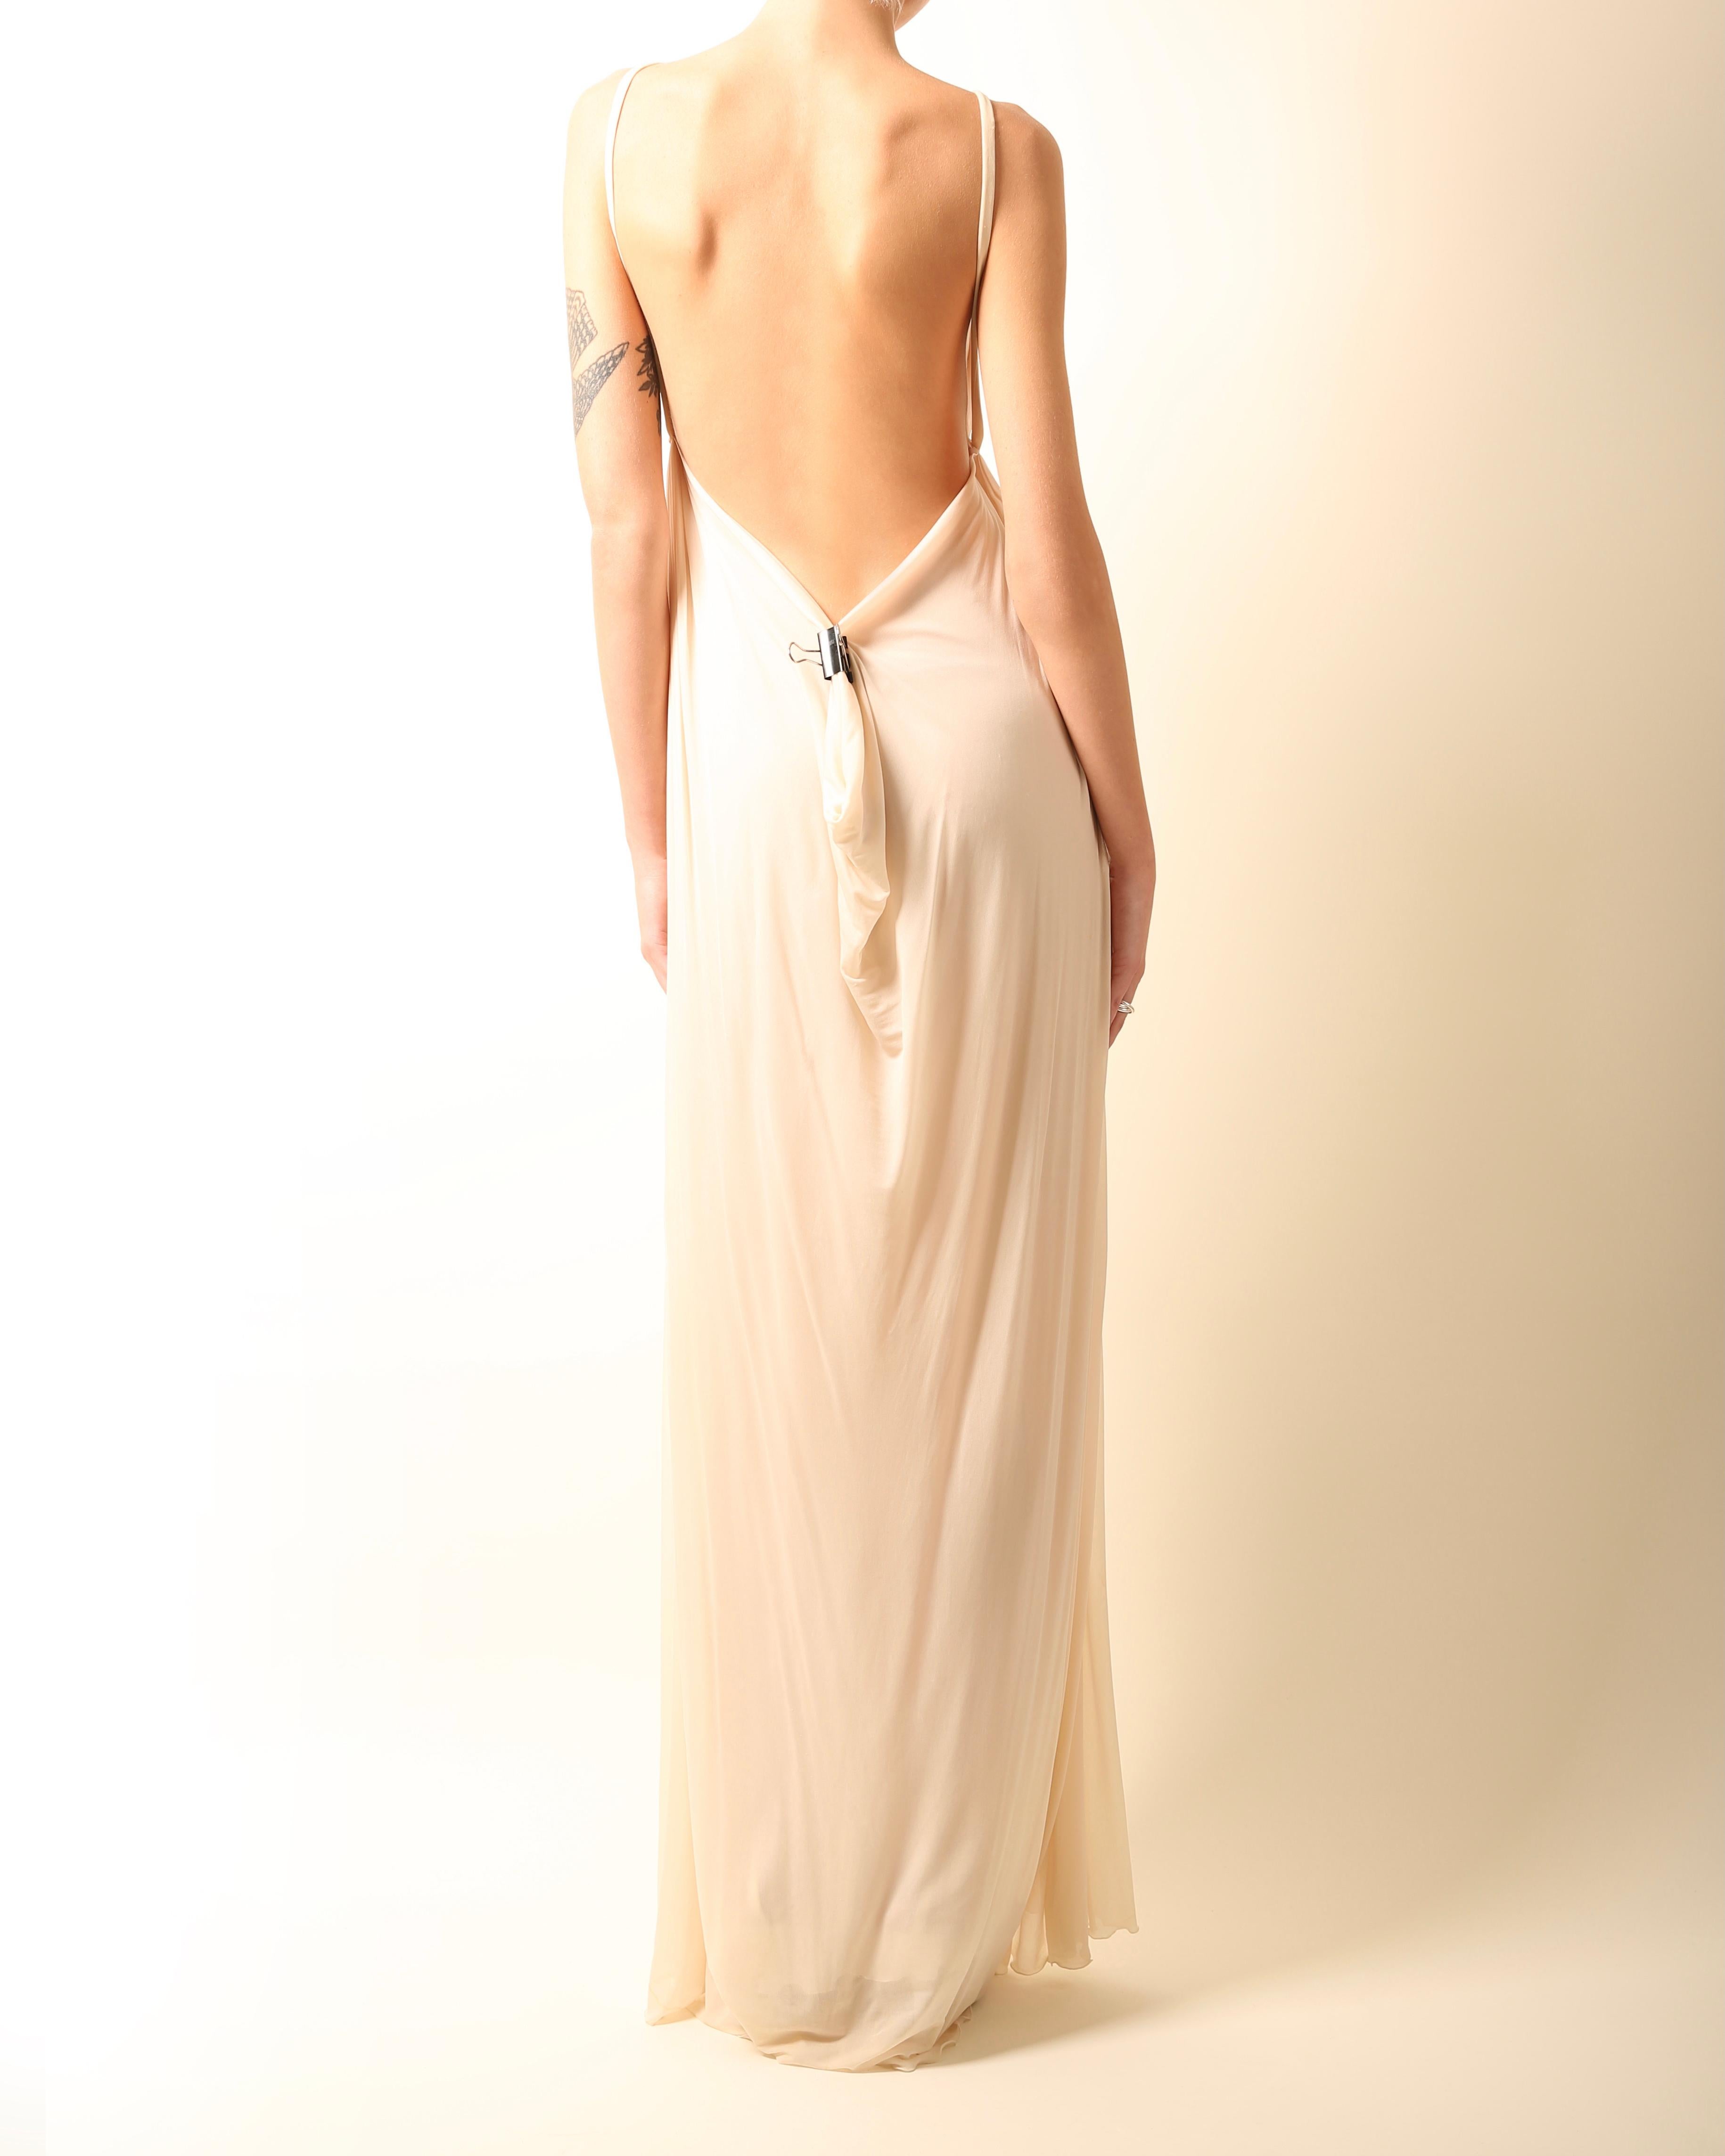 Halston 09 ivory cream plisse grecian style backless wedding maxi dress gown 42 For Sale 6